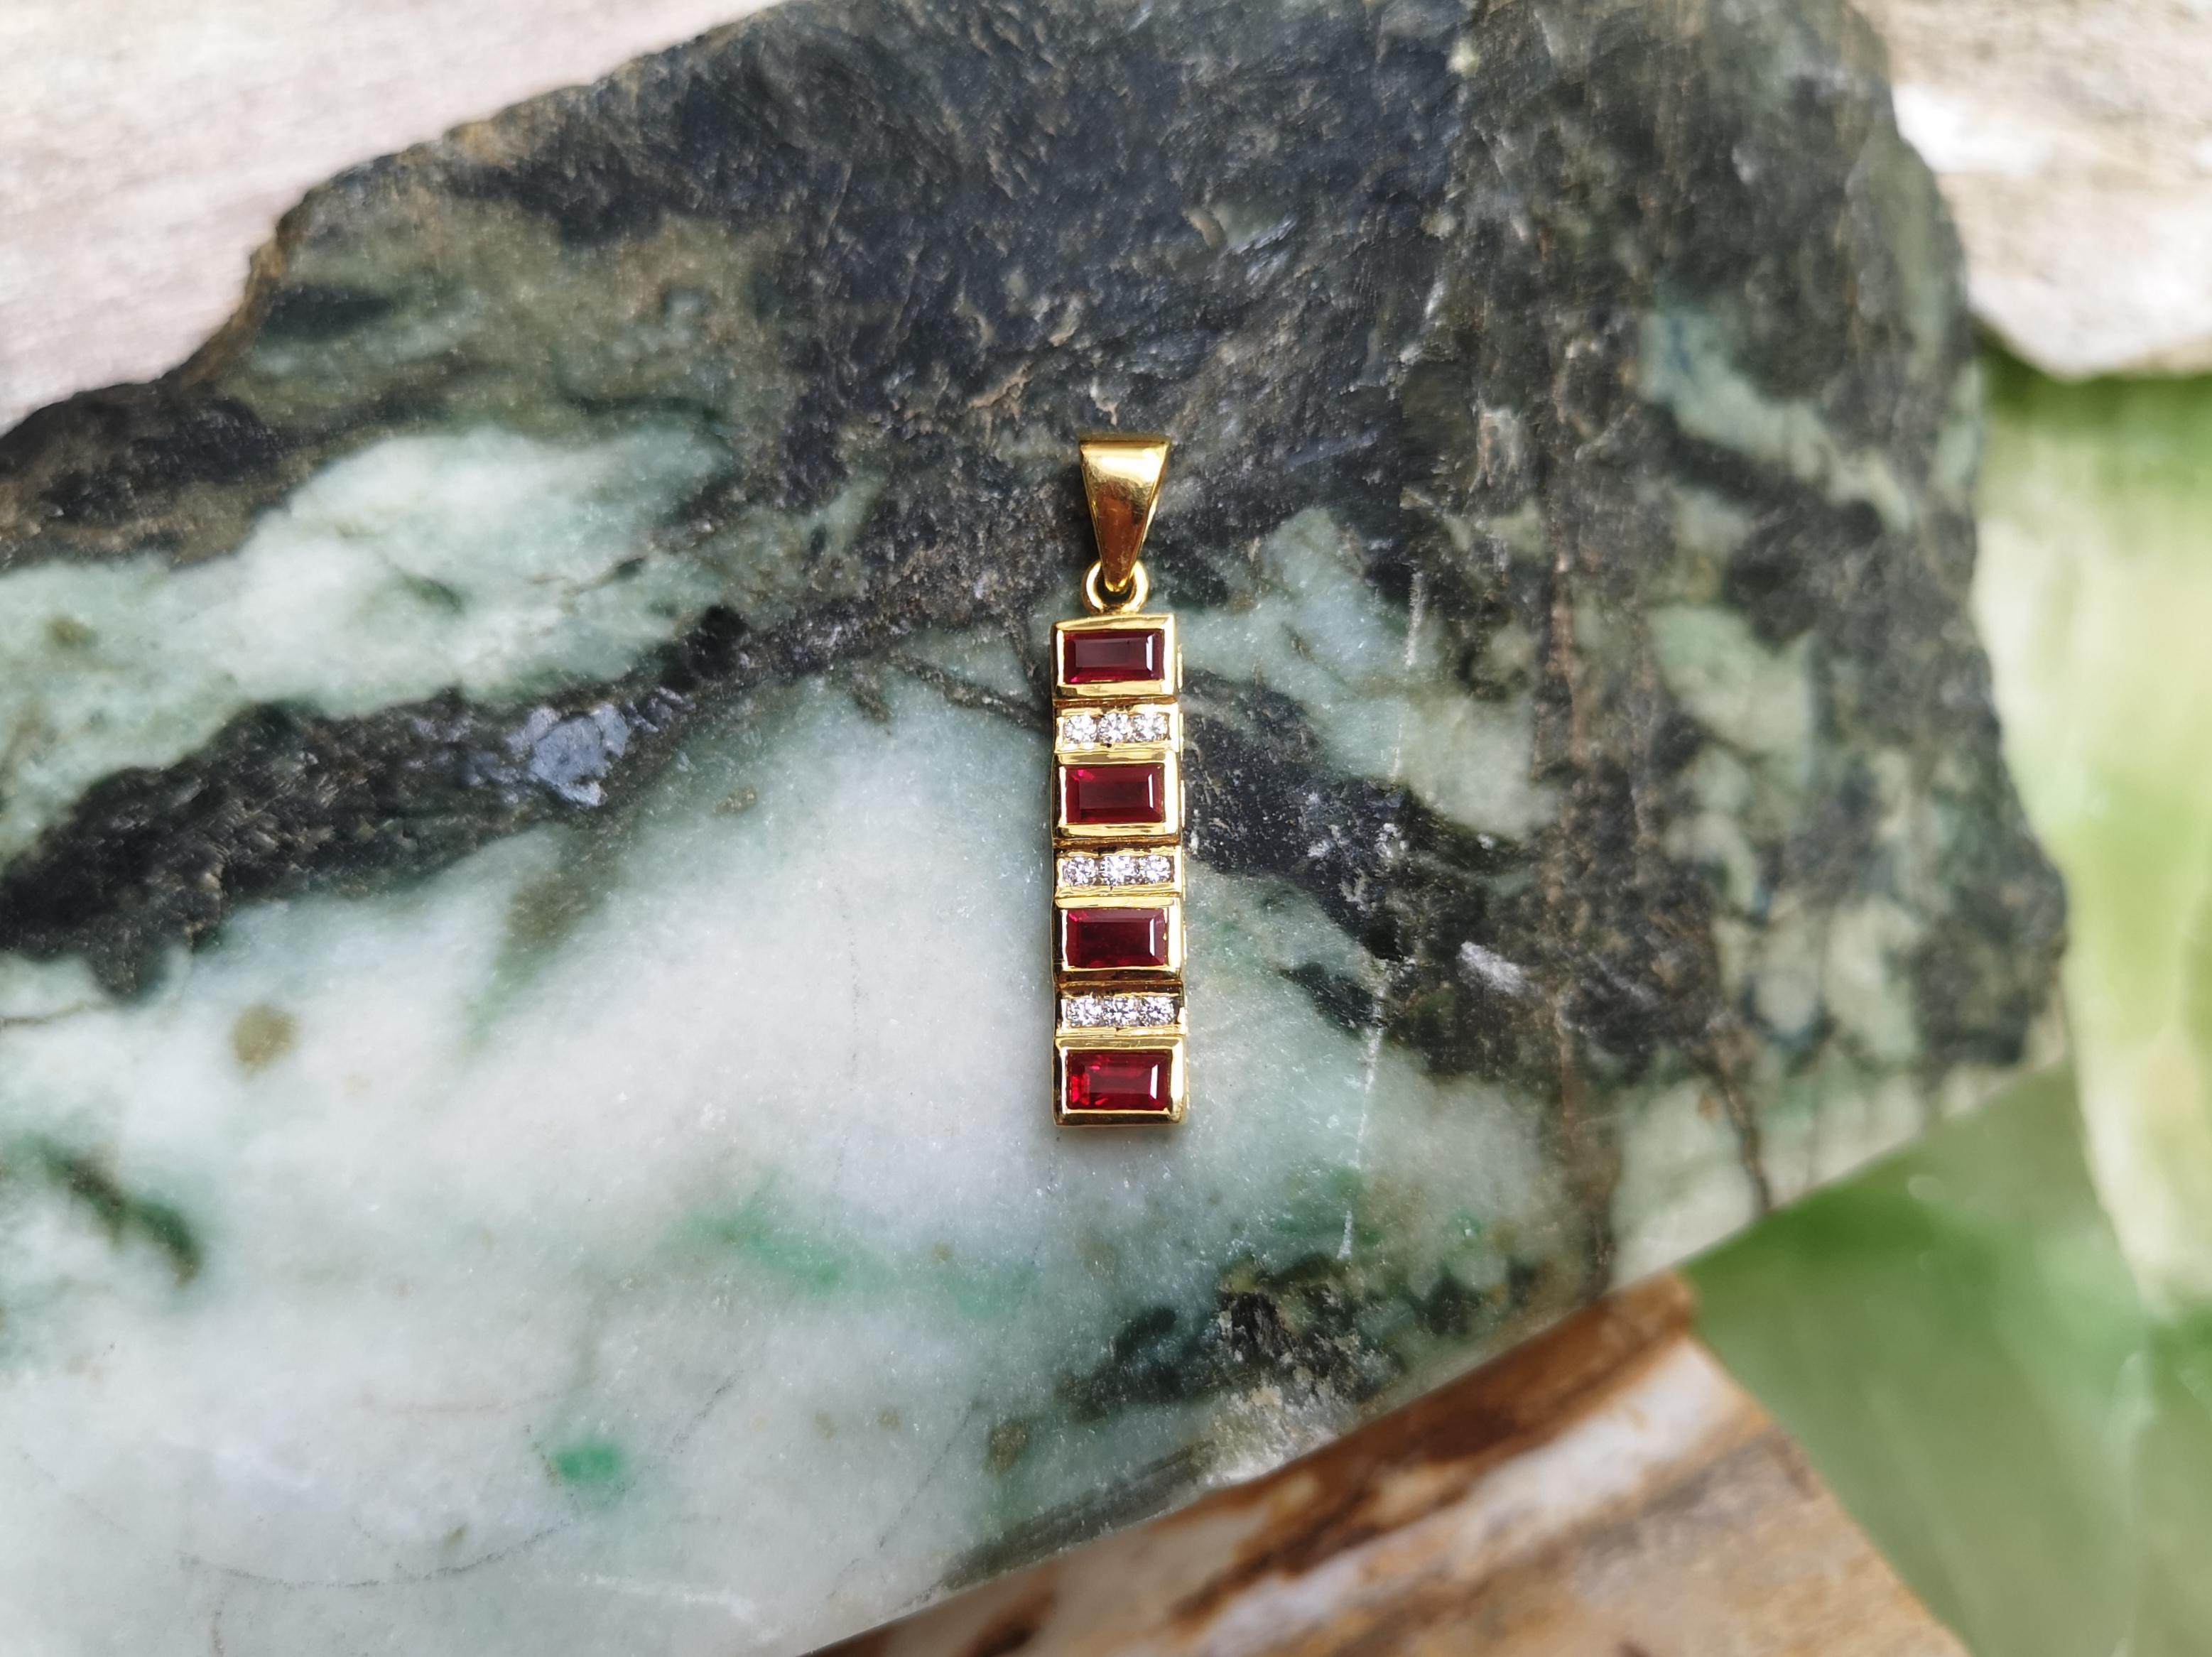 Ruby with Diamond Pendant Set in 18 Karat Gold Settings For Sale 1